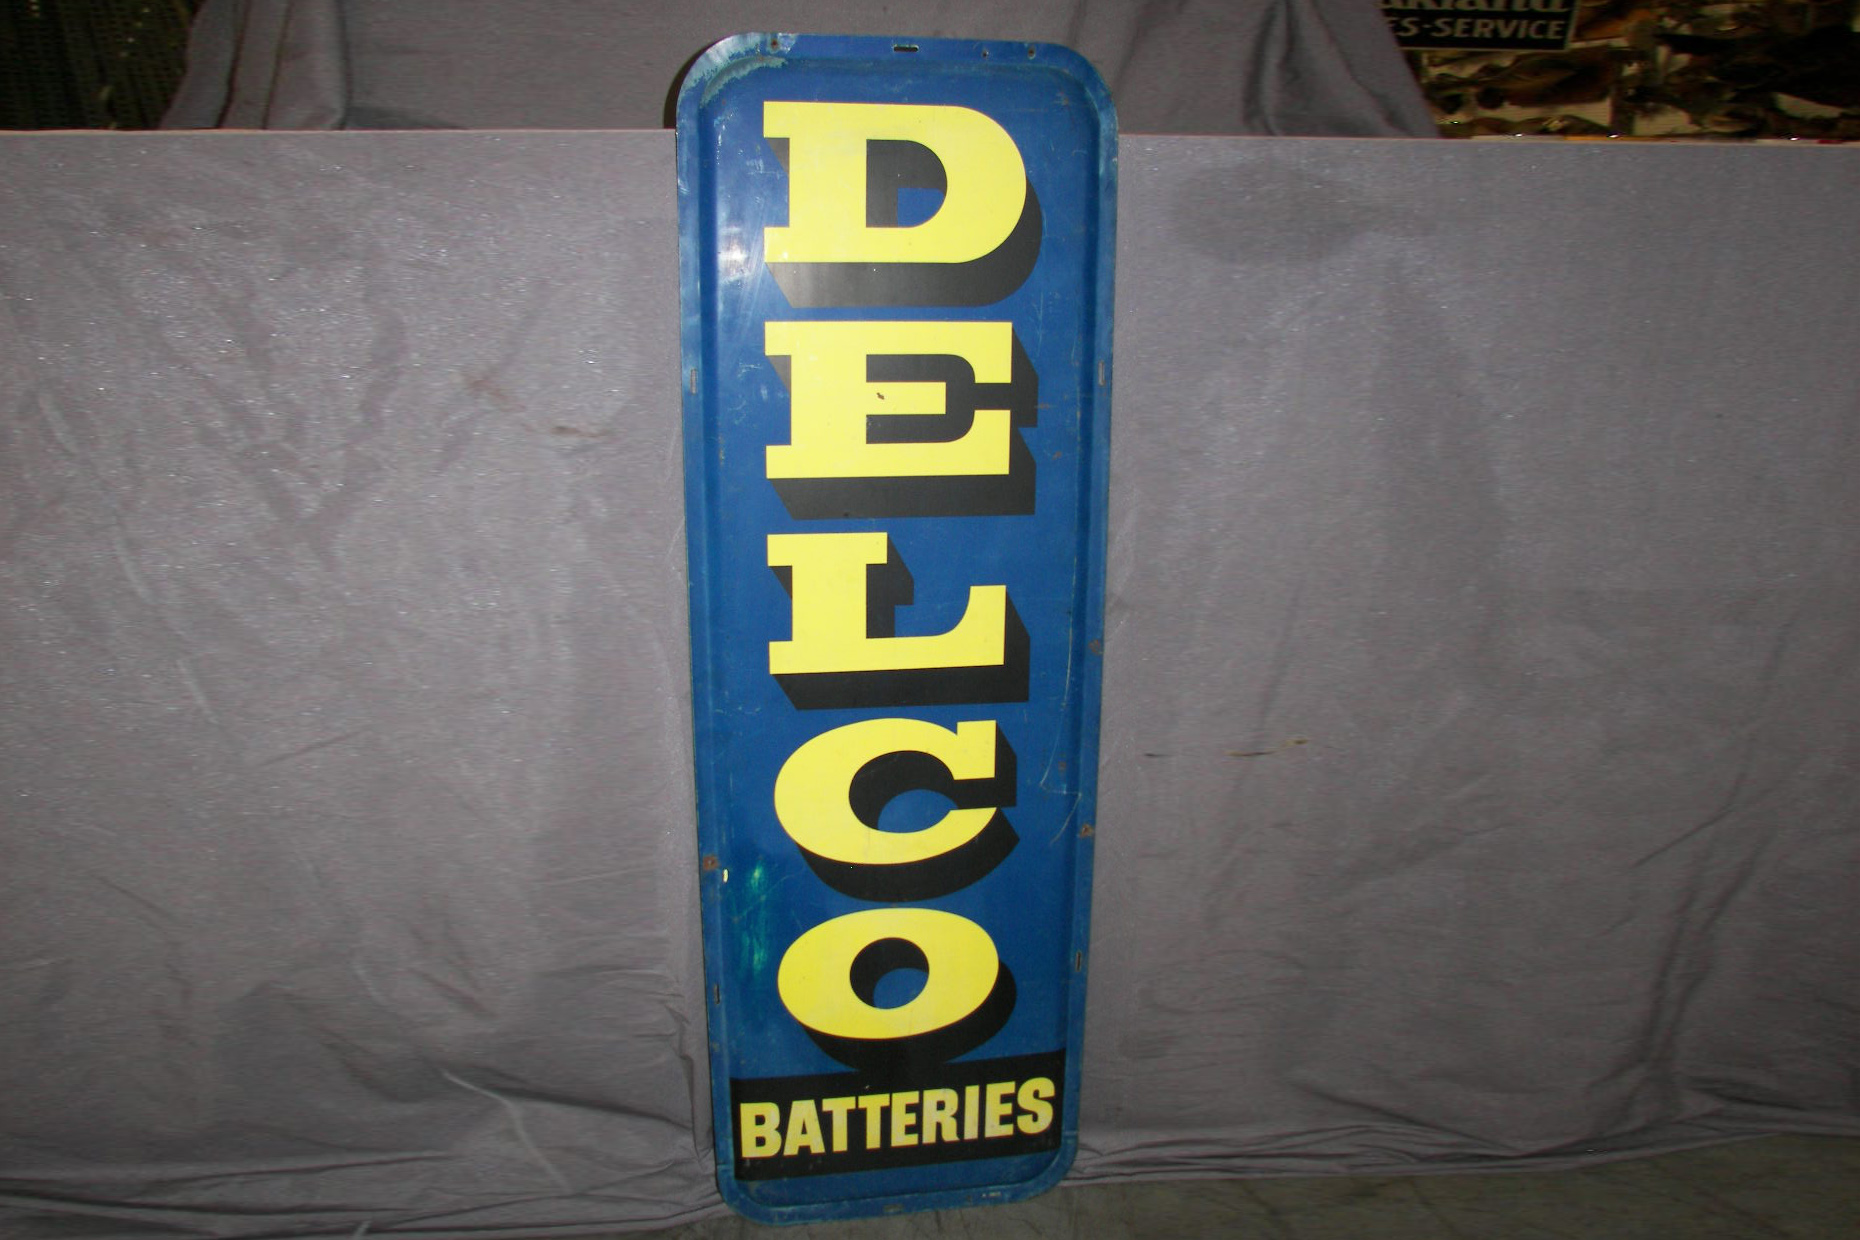 0th Image of a N/A DELCO BATTERIES SIGN